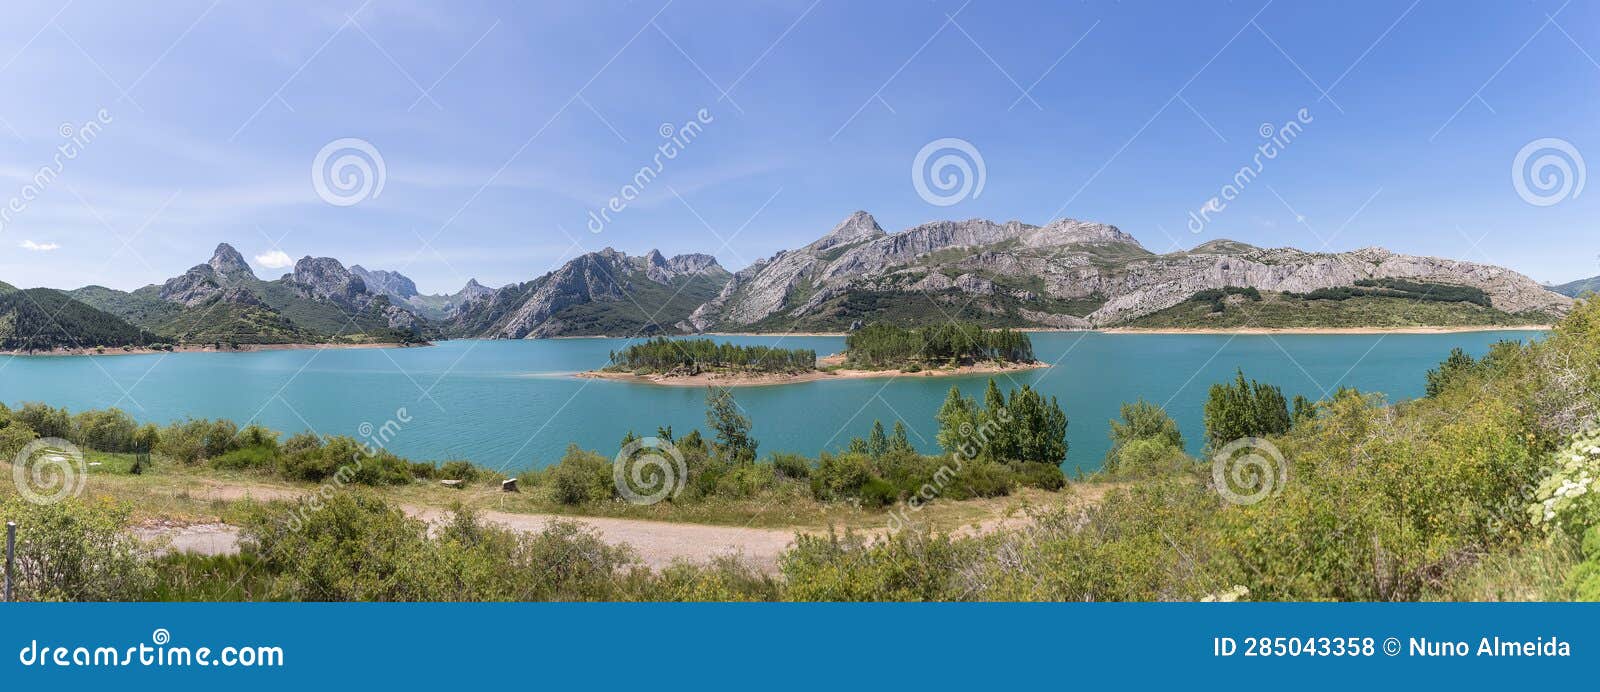 panoramic view at the riaÃ±o reservoir, located on picos de europa or peaks of europe